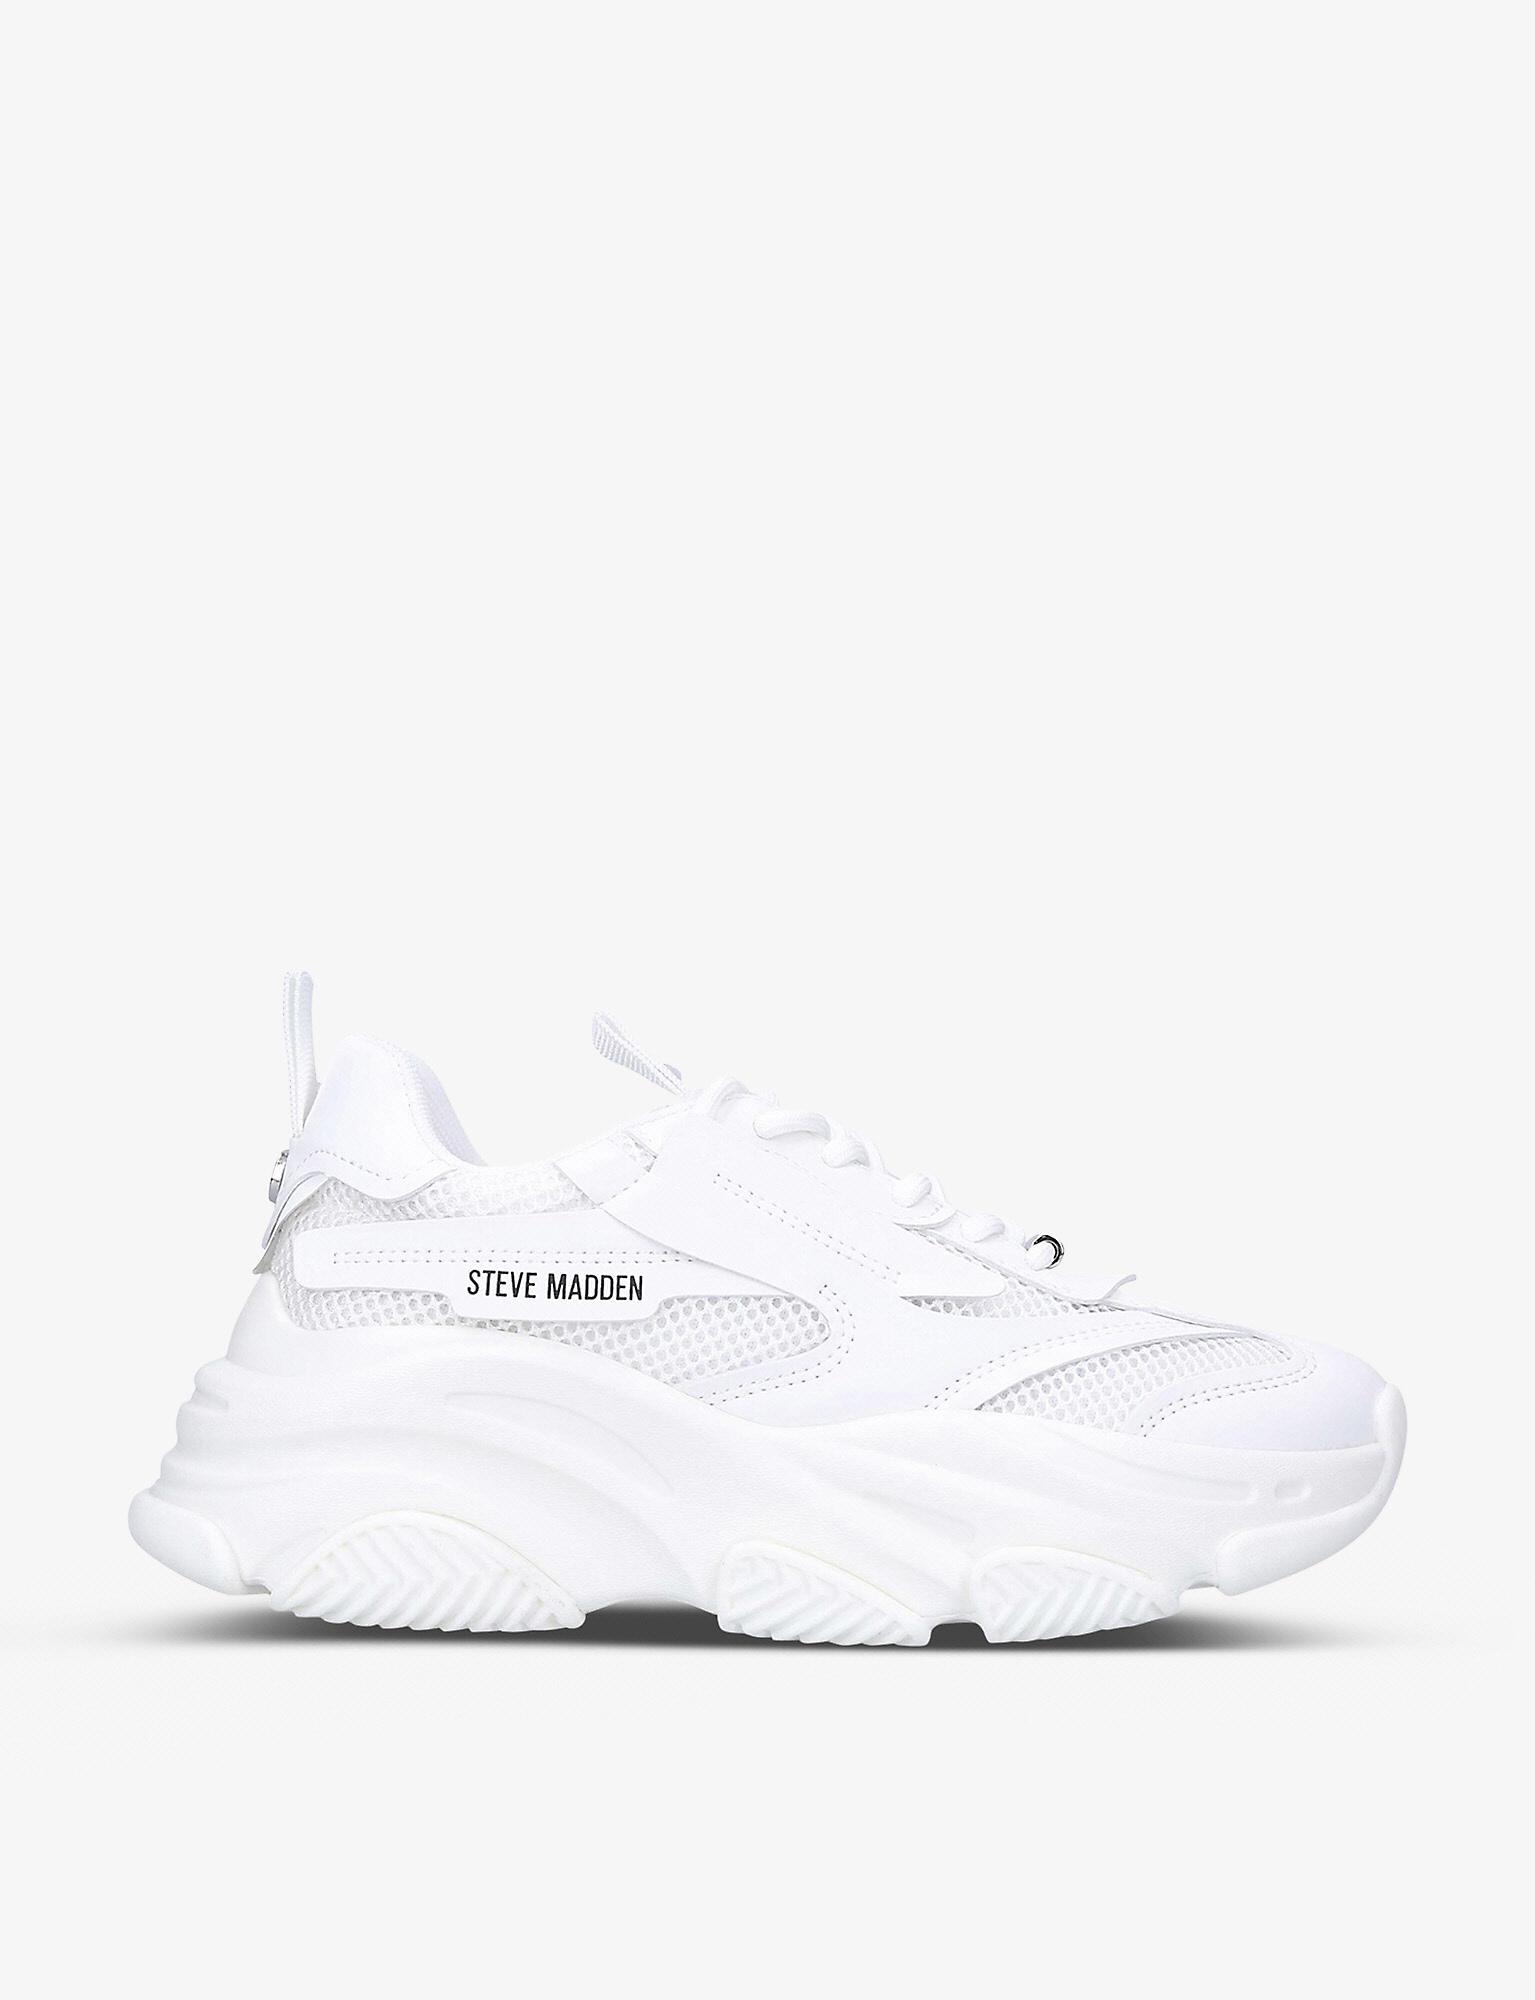 Steve Madden Possession Mesh-textile Chunky Trainers in White | Lyst